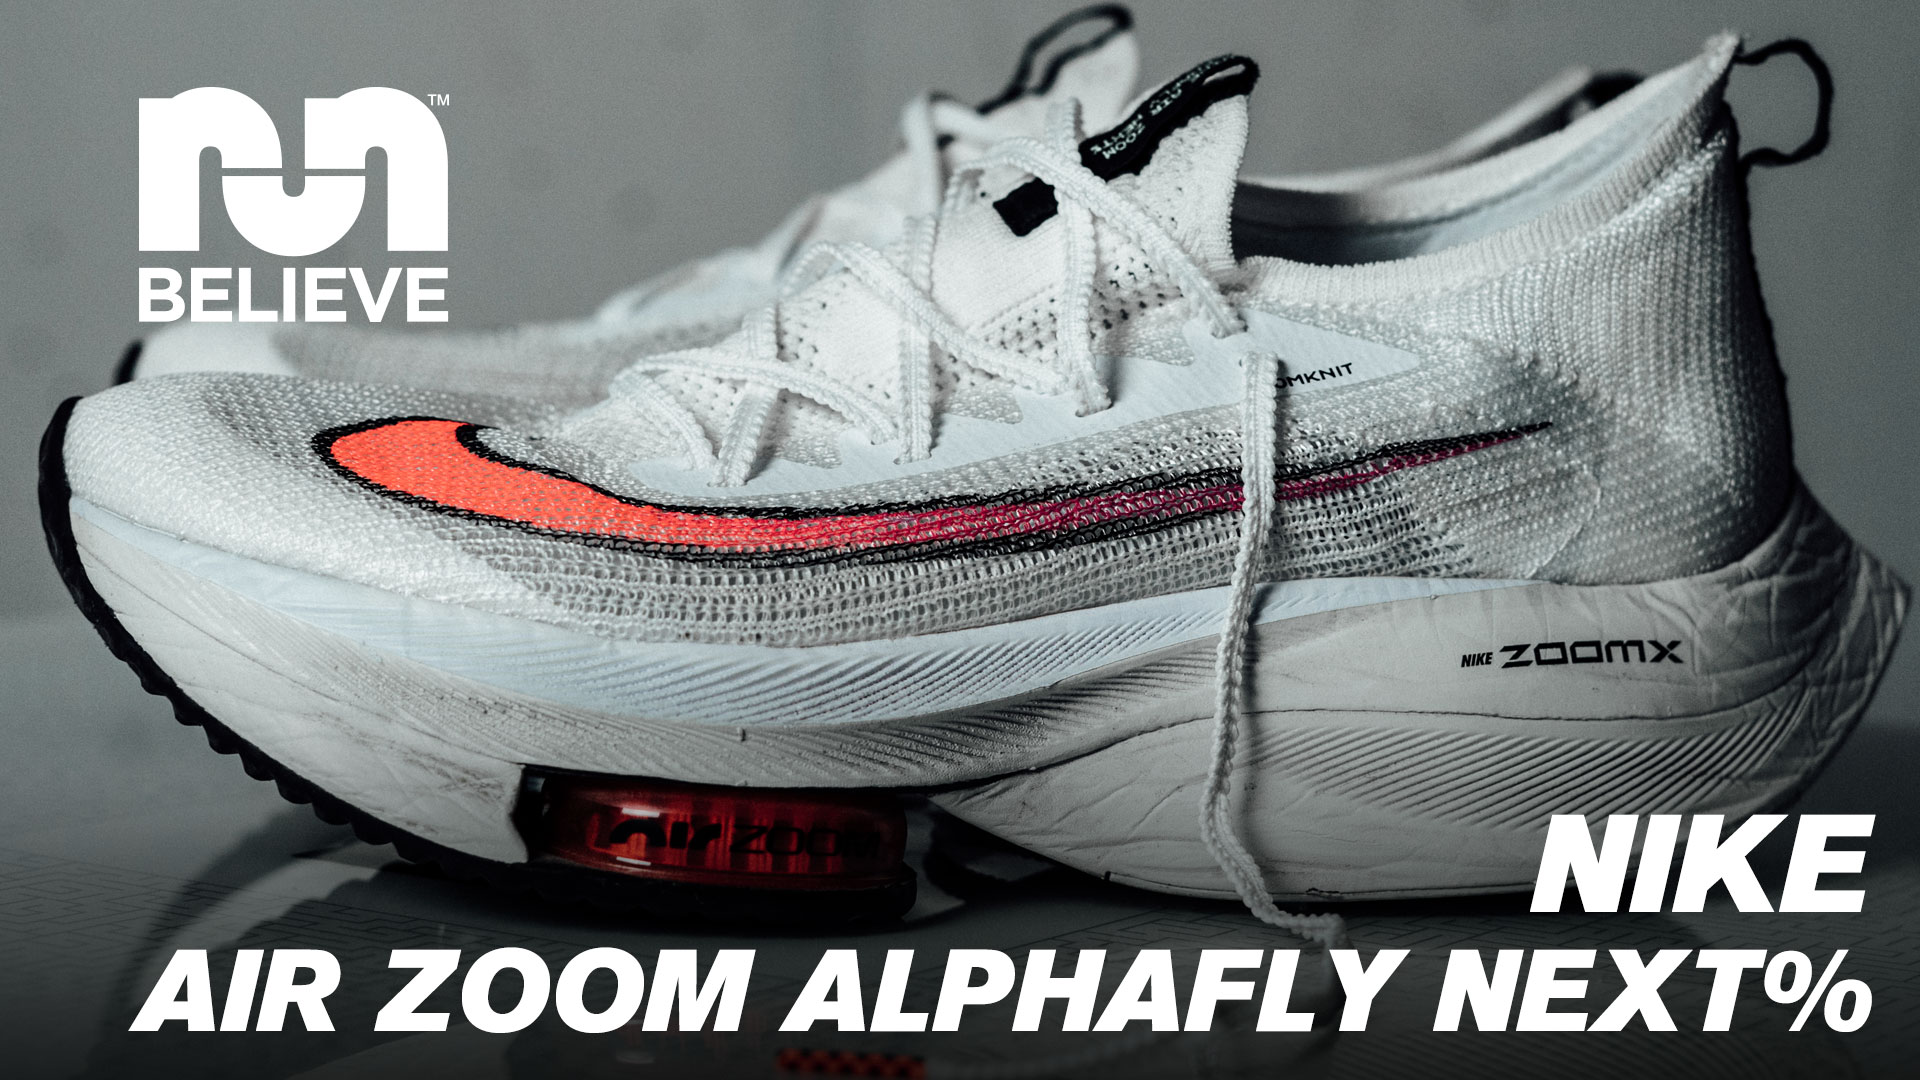 nike air zoom alphafly next review